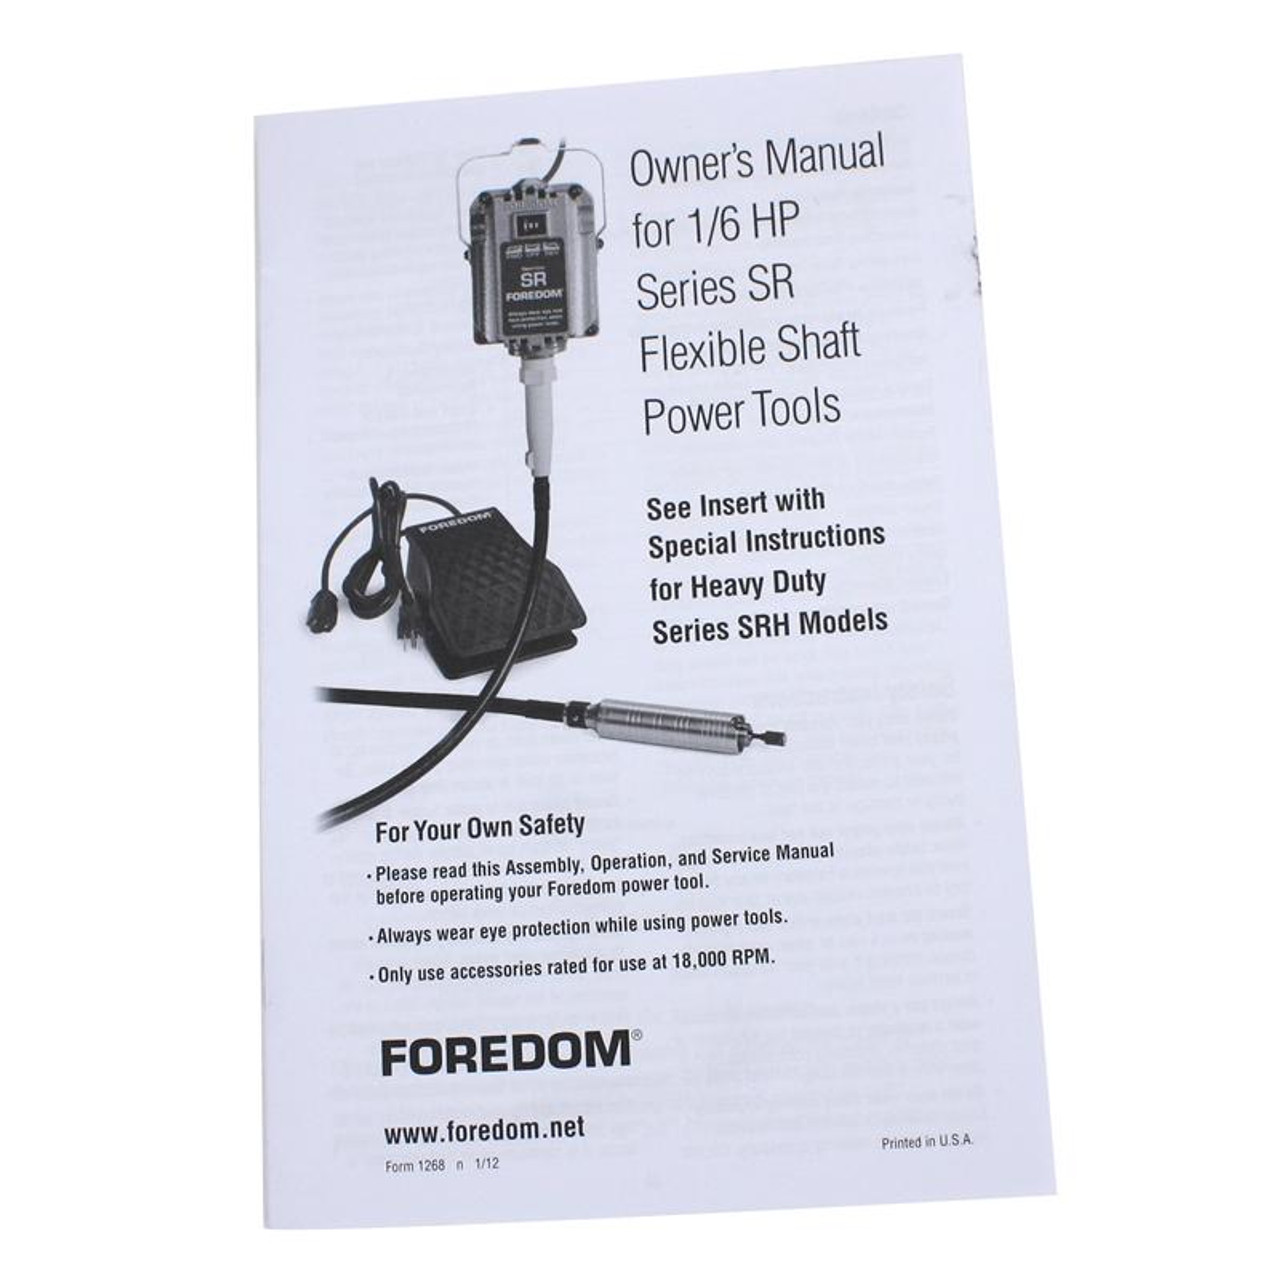 Maintenance Kit for Foredom® Flex Shaft Motors most commonly in use